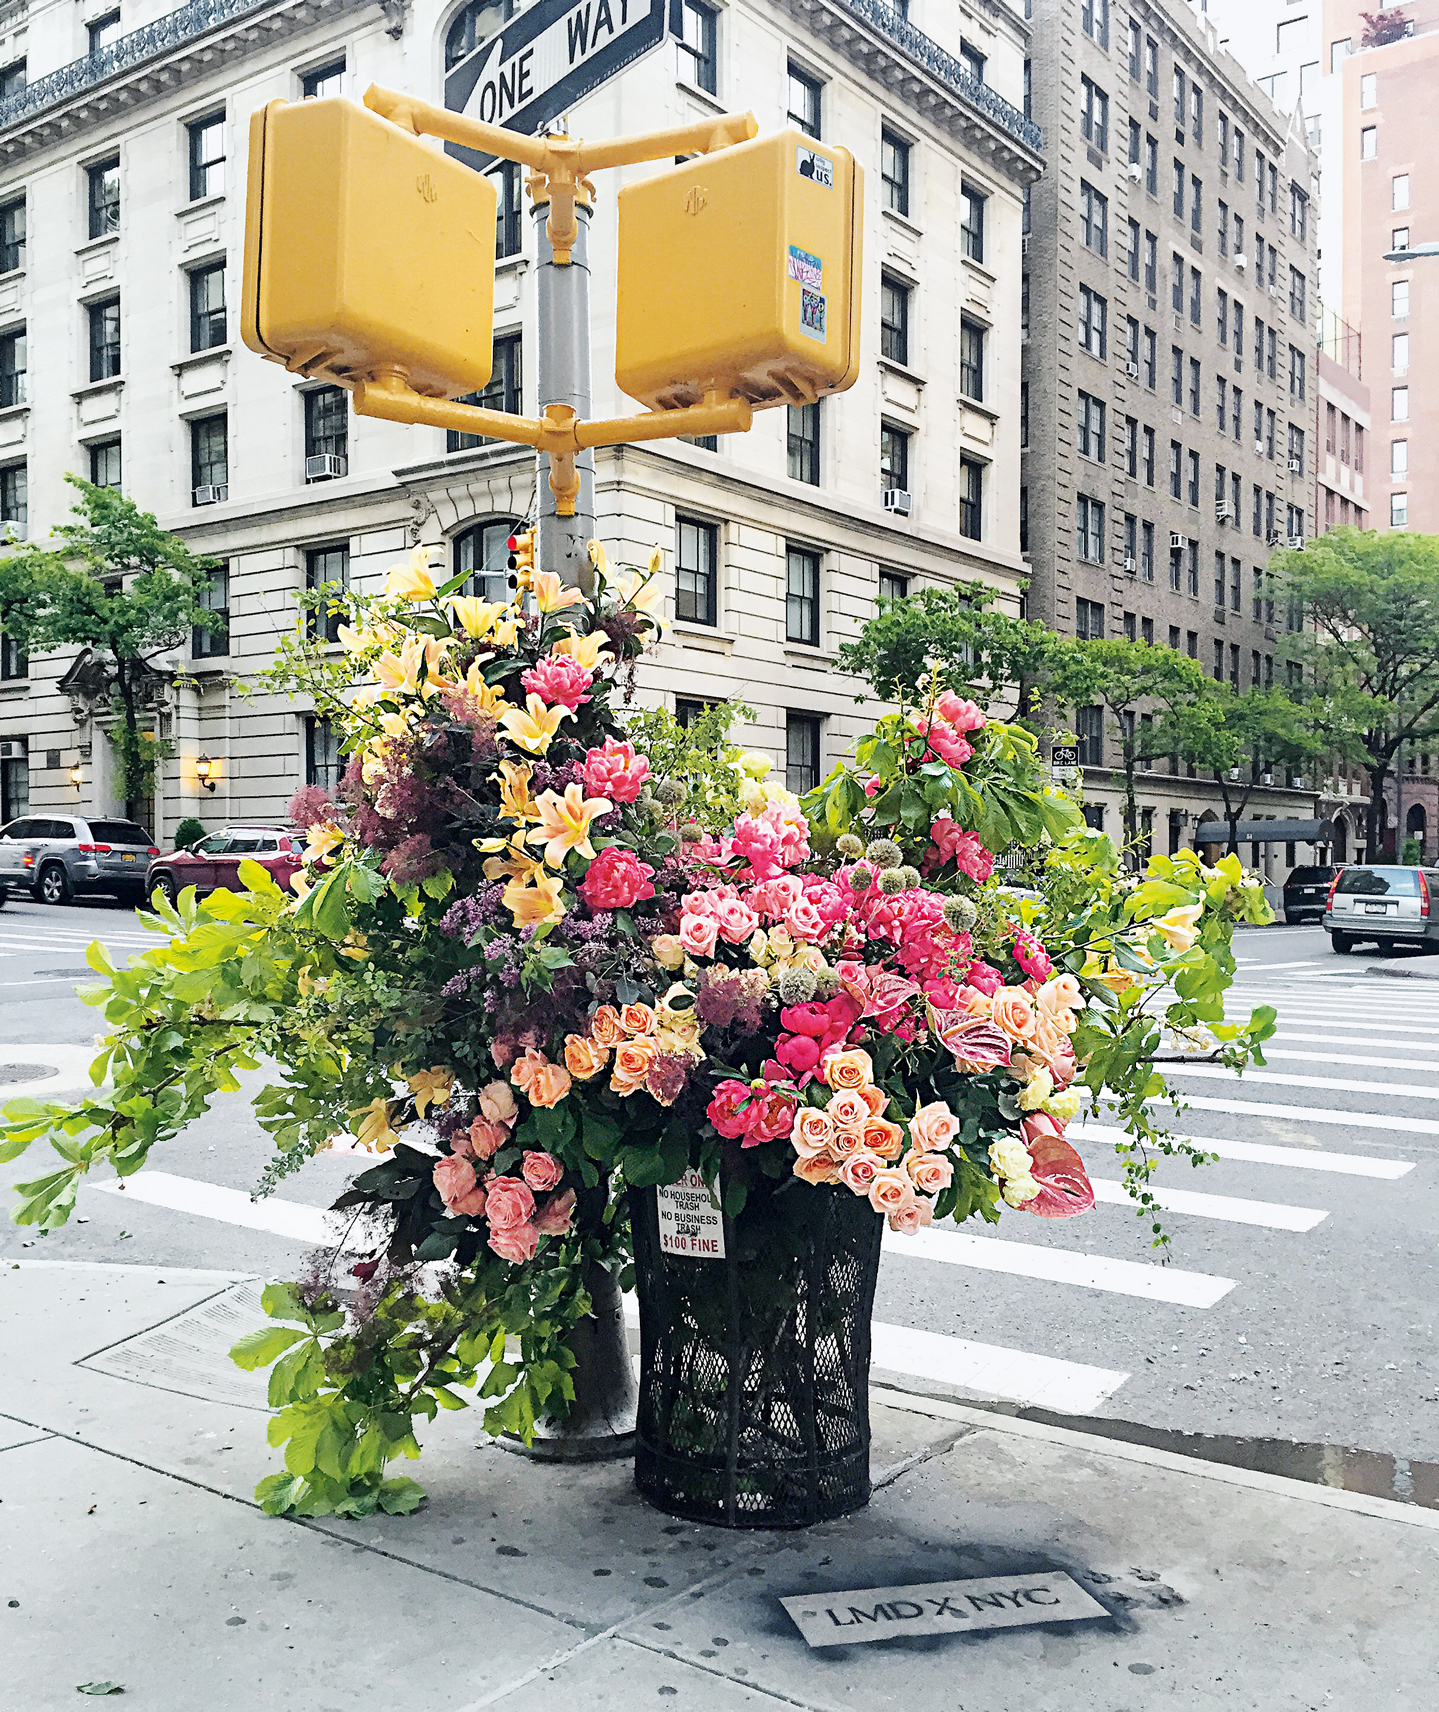 Trash Can Flower Flash Upper East Side Manhattan, NYC - Lewis Miller as featured in Blooms Contemporary Floral Design